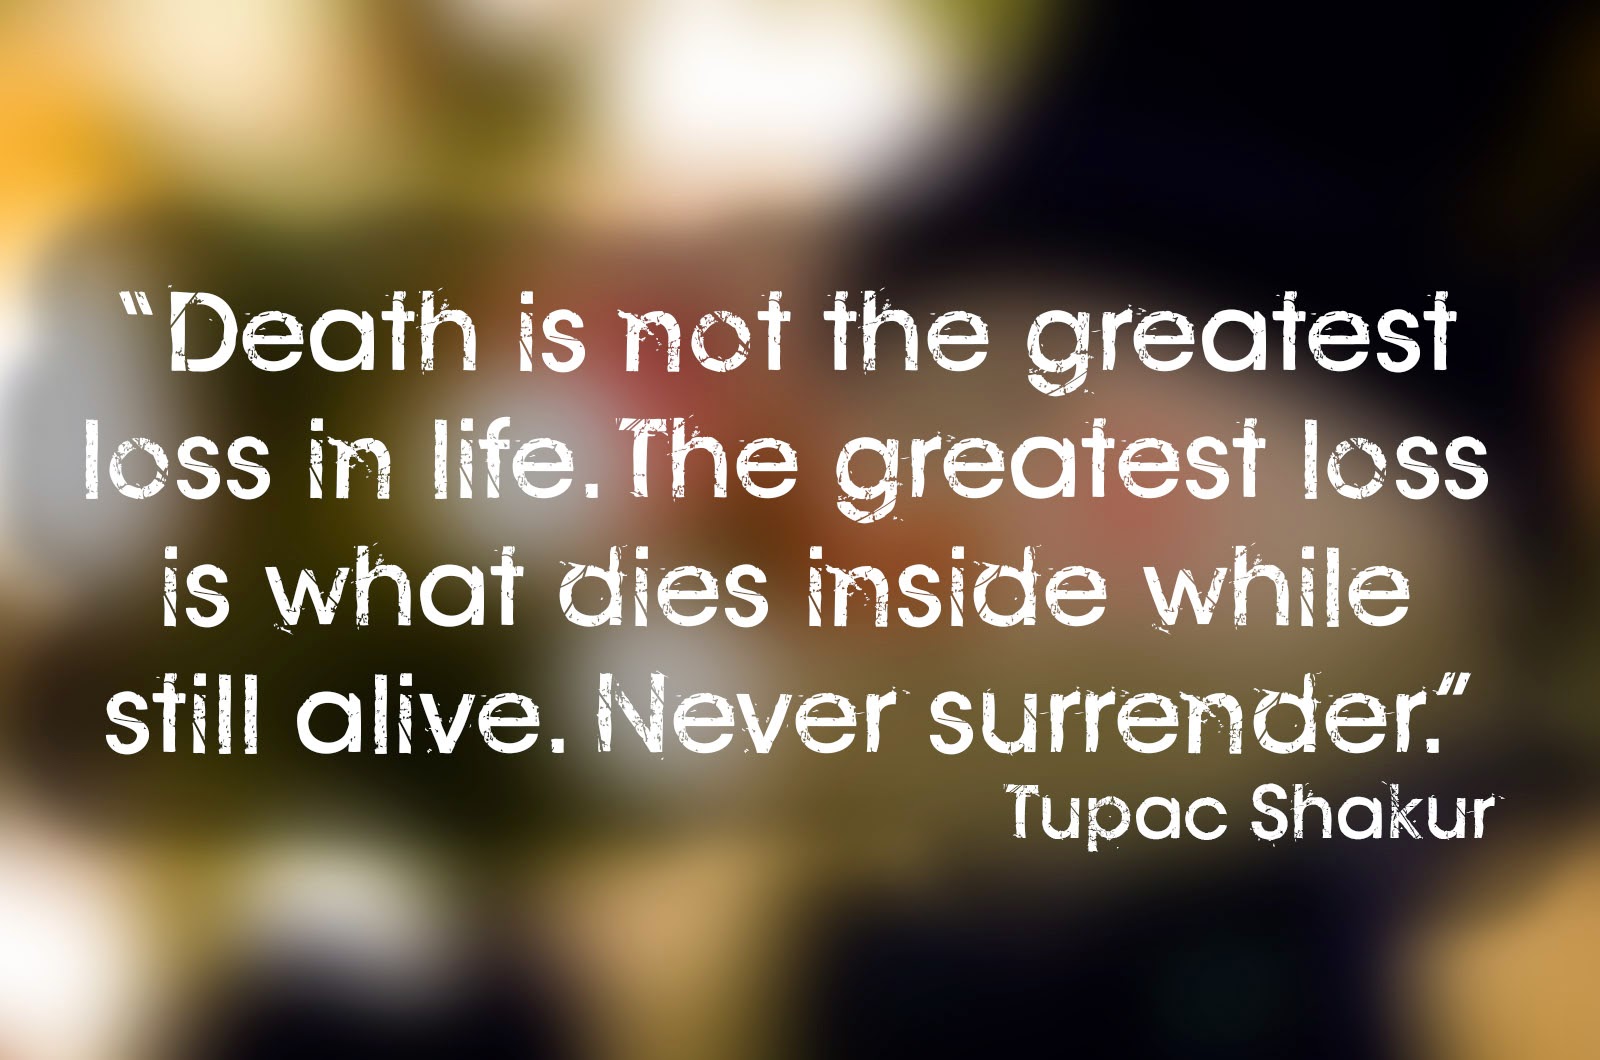 The greatest loss is what s inside while still alive Never surrender ”